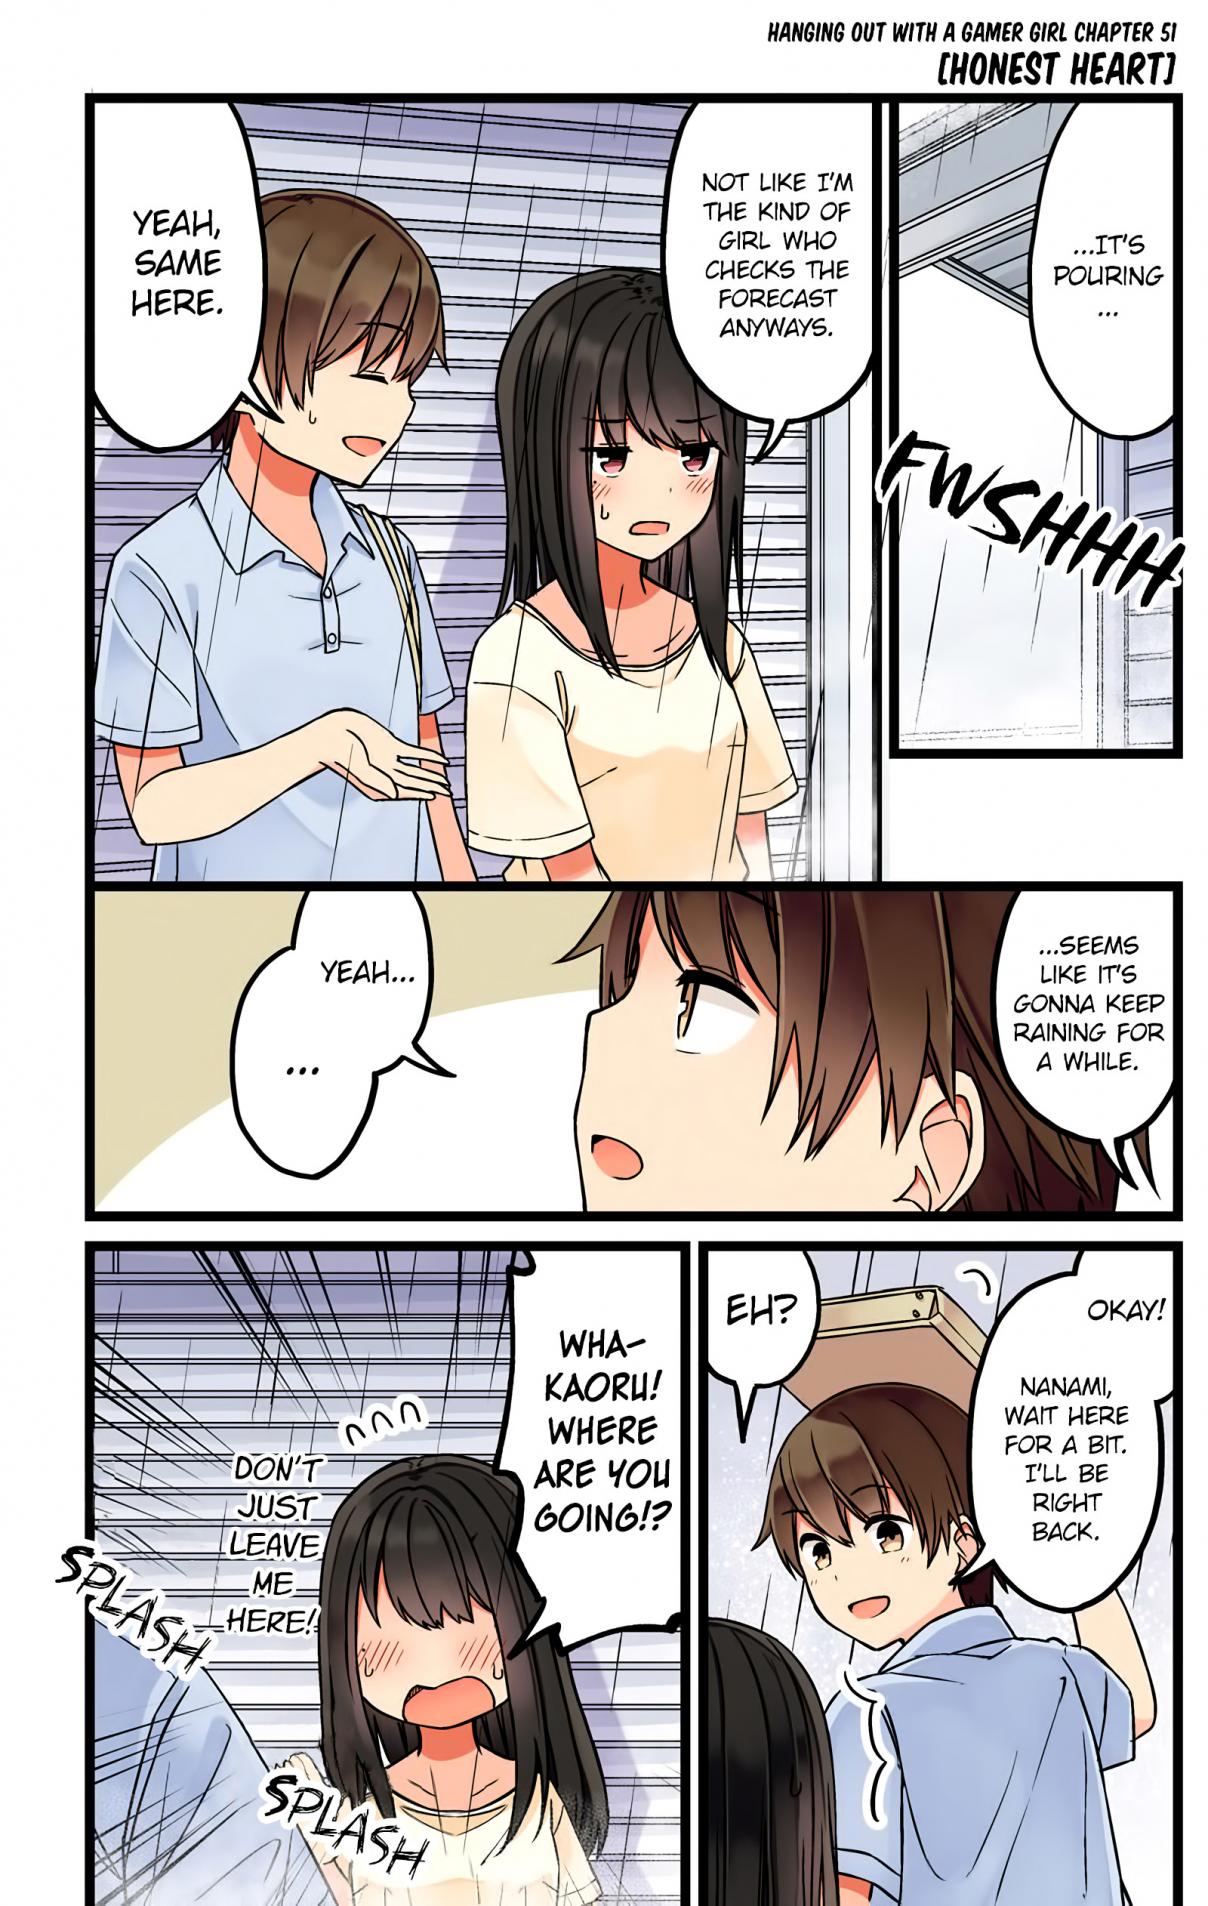 Hanging Out with a Gamer Girl Ch. 51 Honest Heart